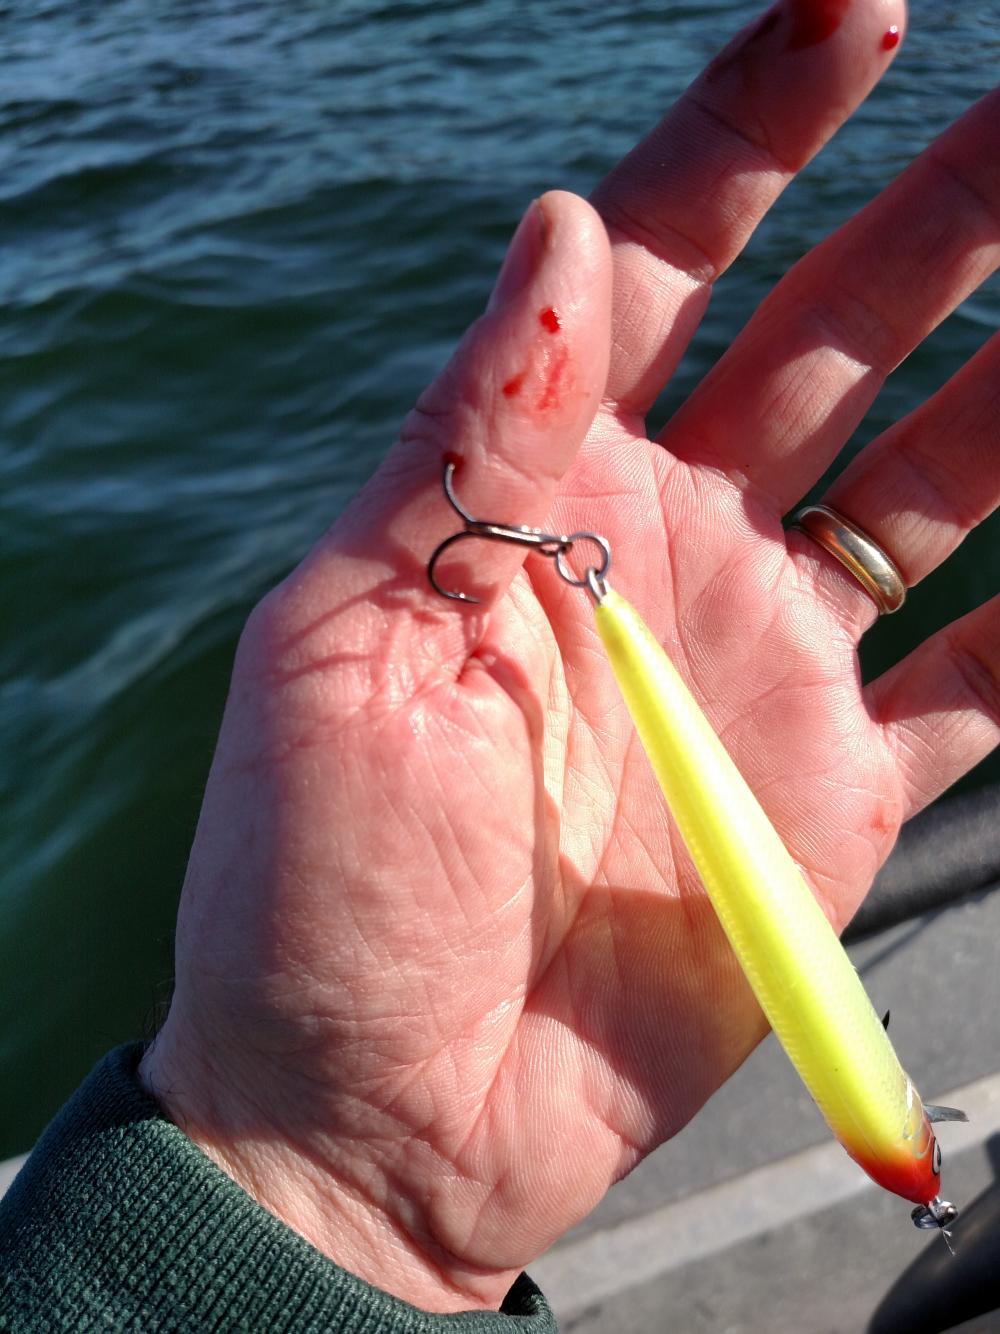 100 Reasons To Replace Your Treble Hooks (Graphic)